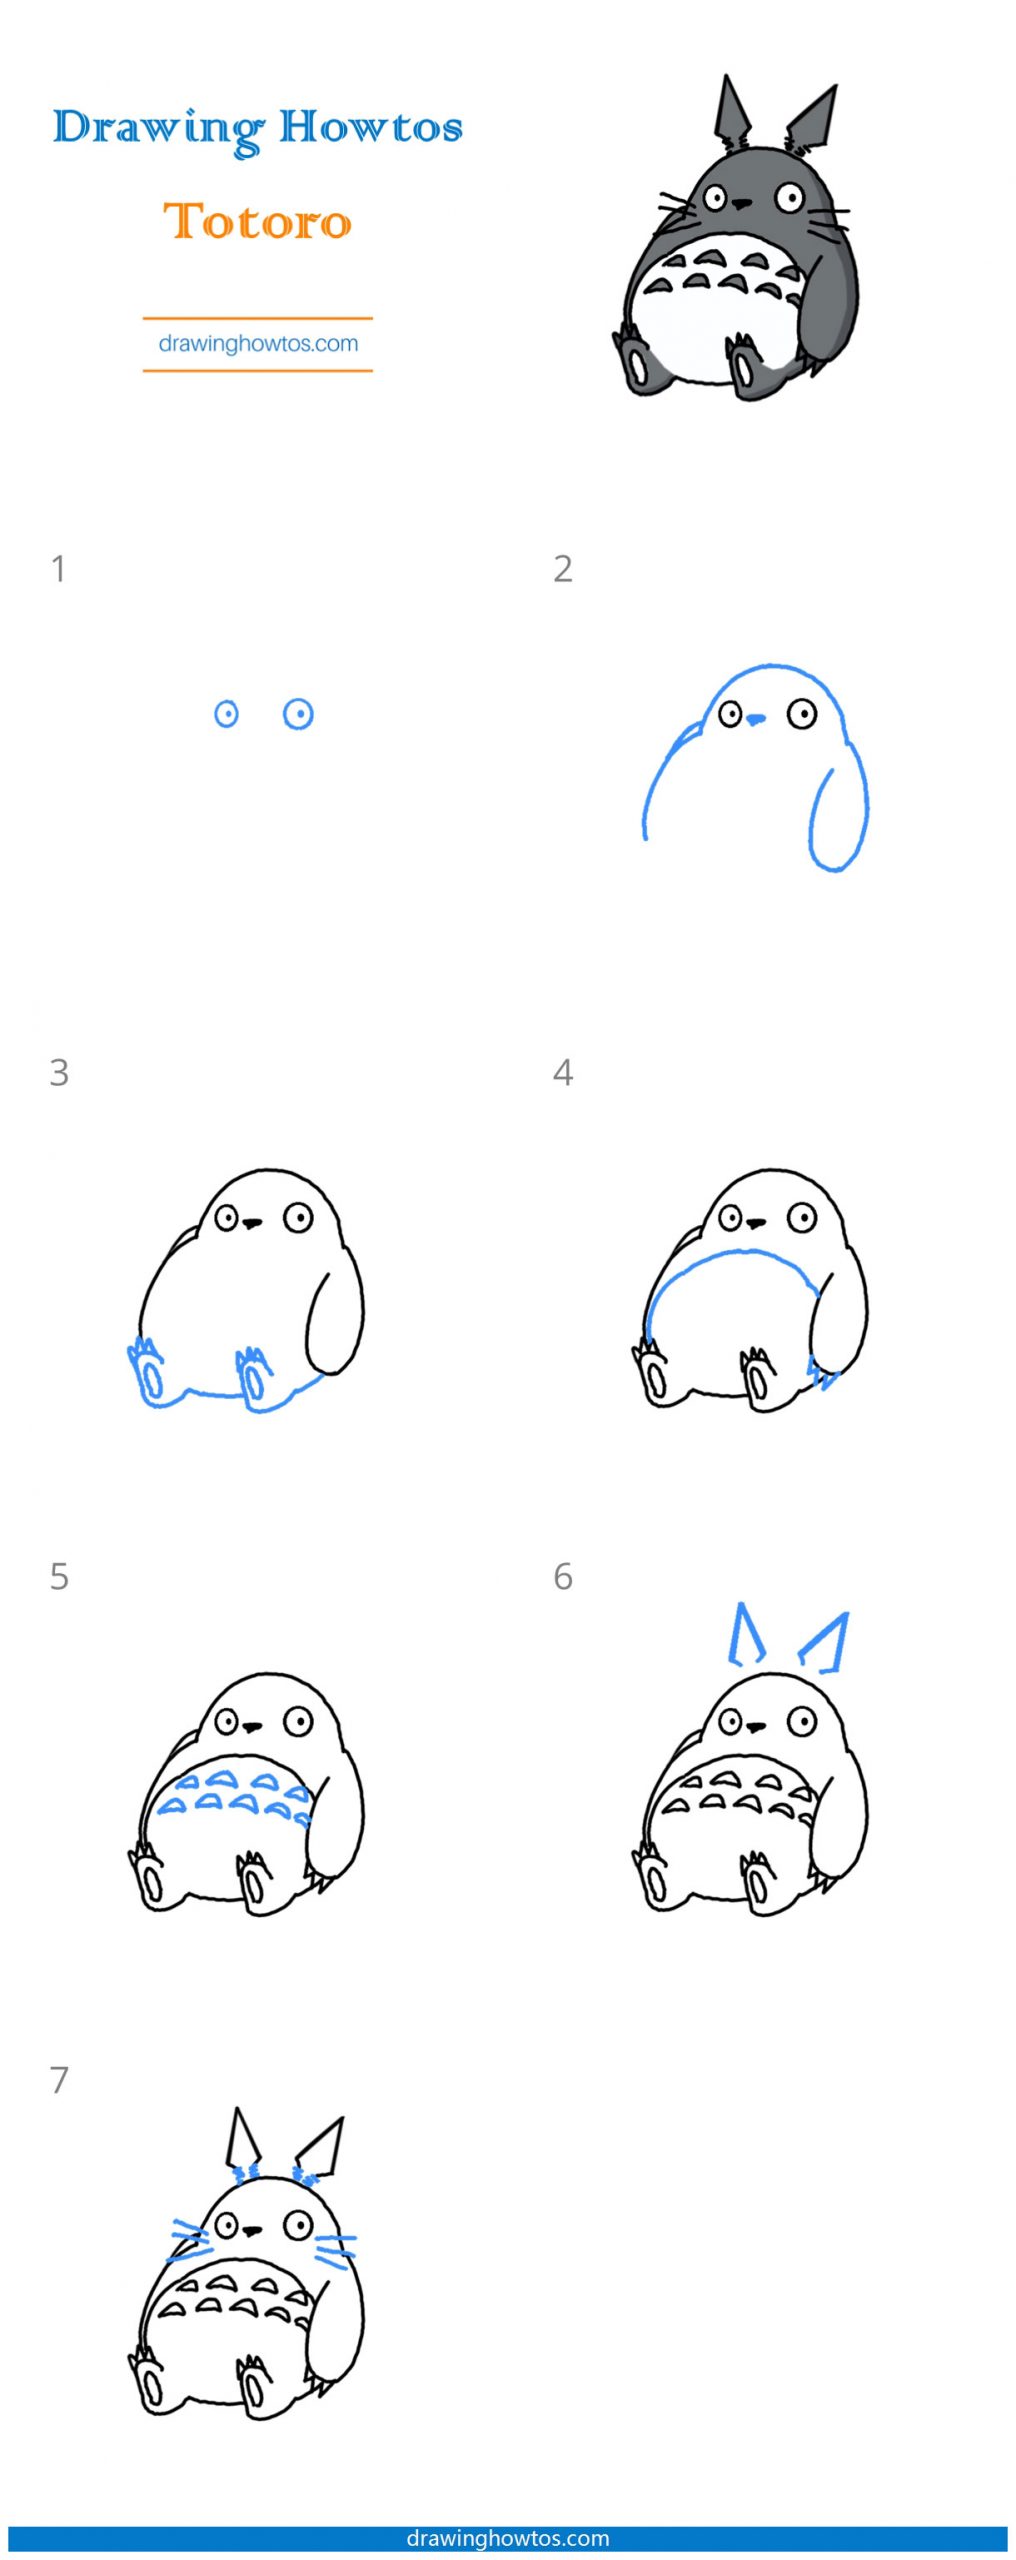 How to Draw Totoro Step by Step